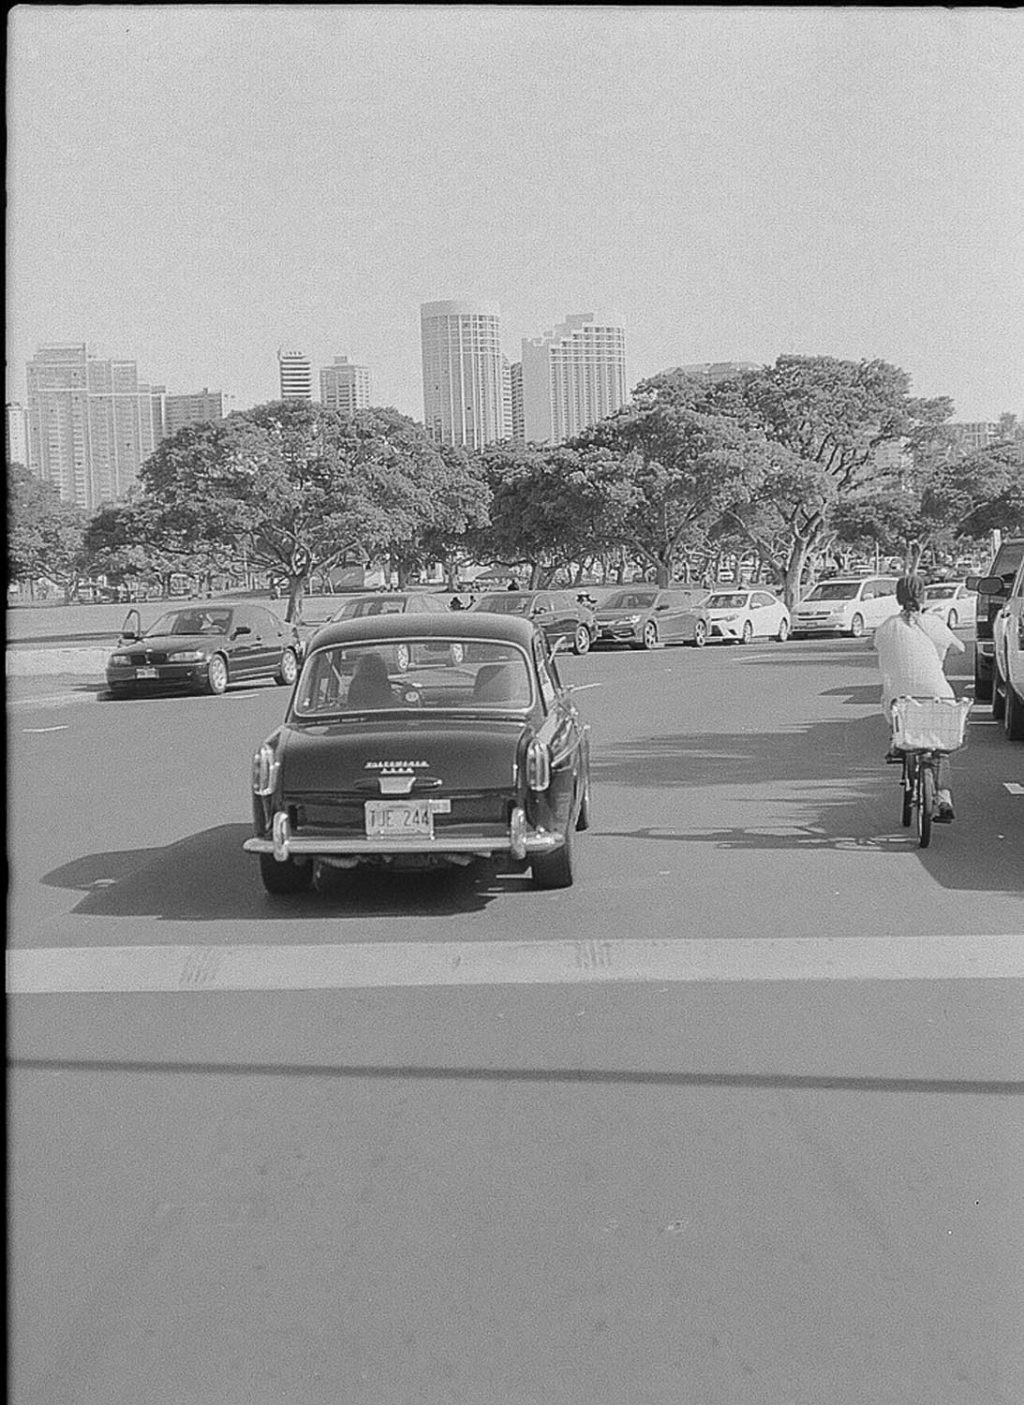 The hardest shot I've ever taken. I had to chase this car down on my skateboard to get this shot. This is Honolulu, Hawaii near the beach walk.